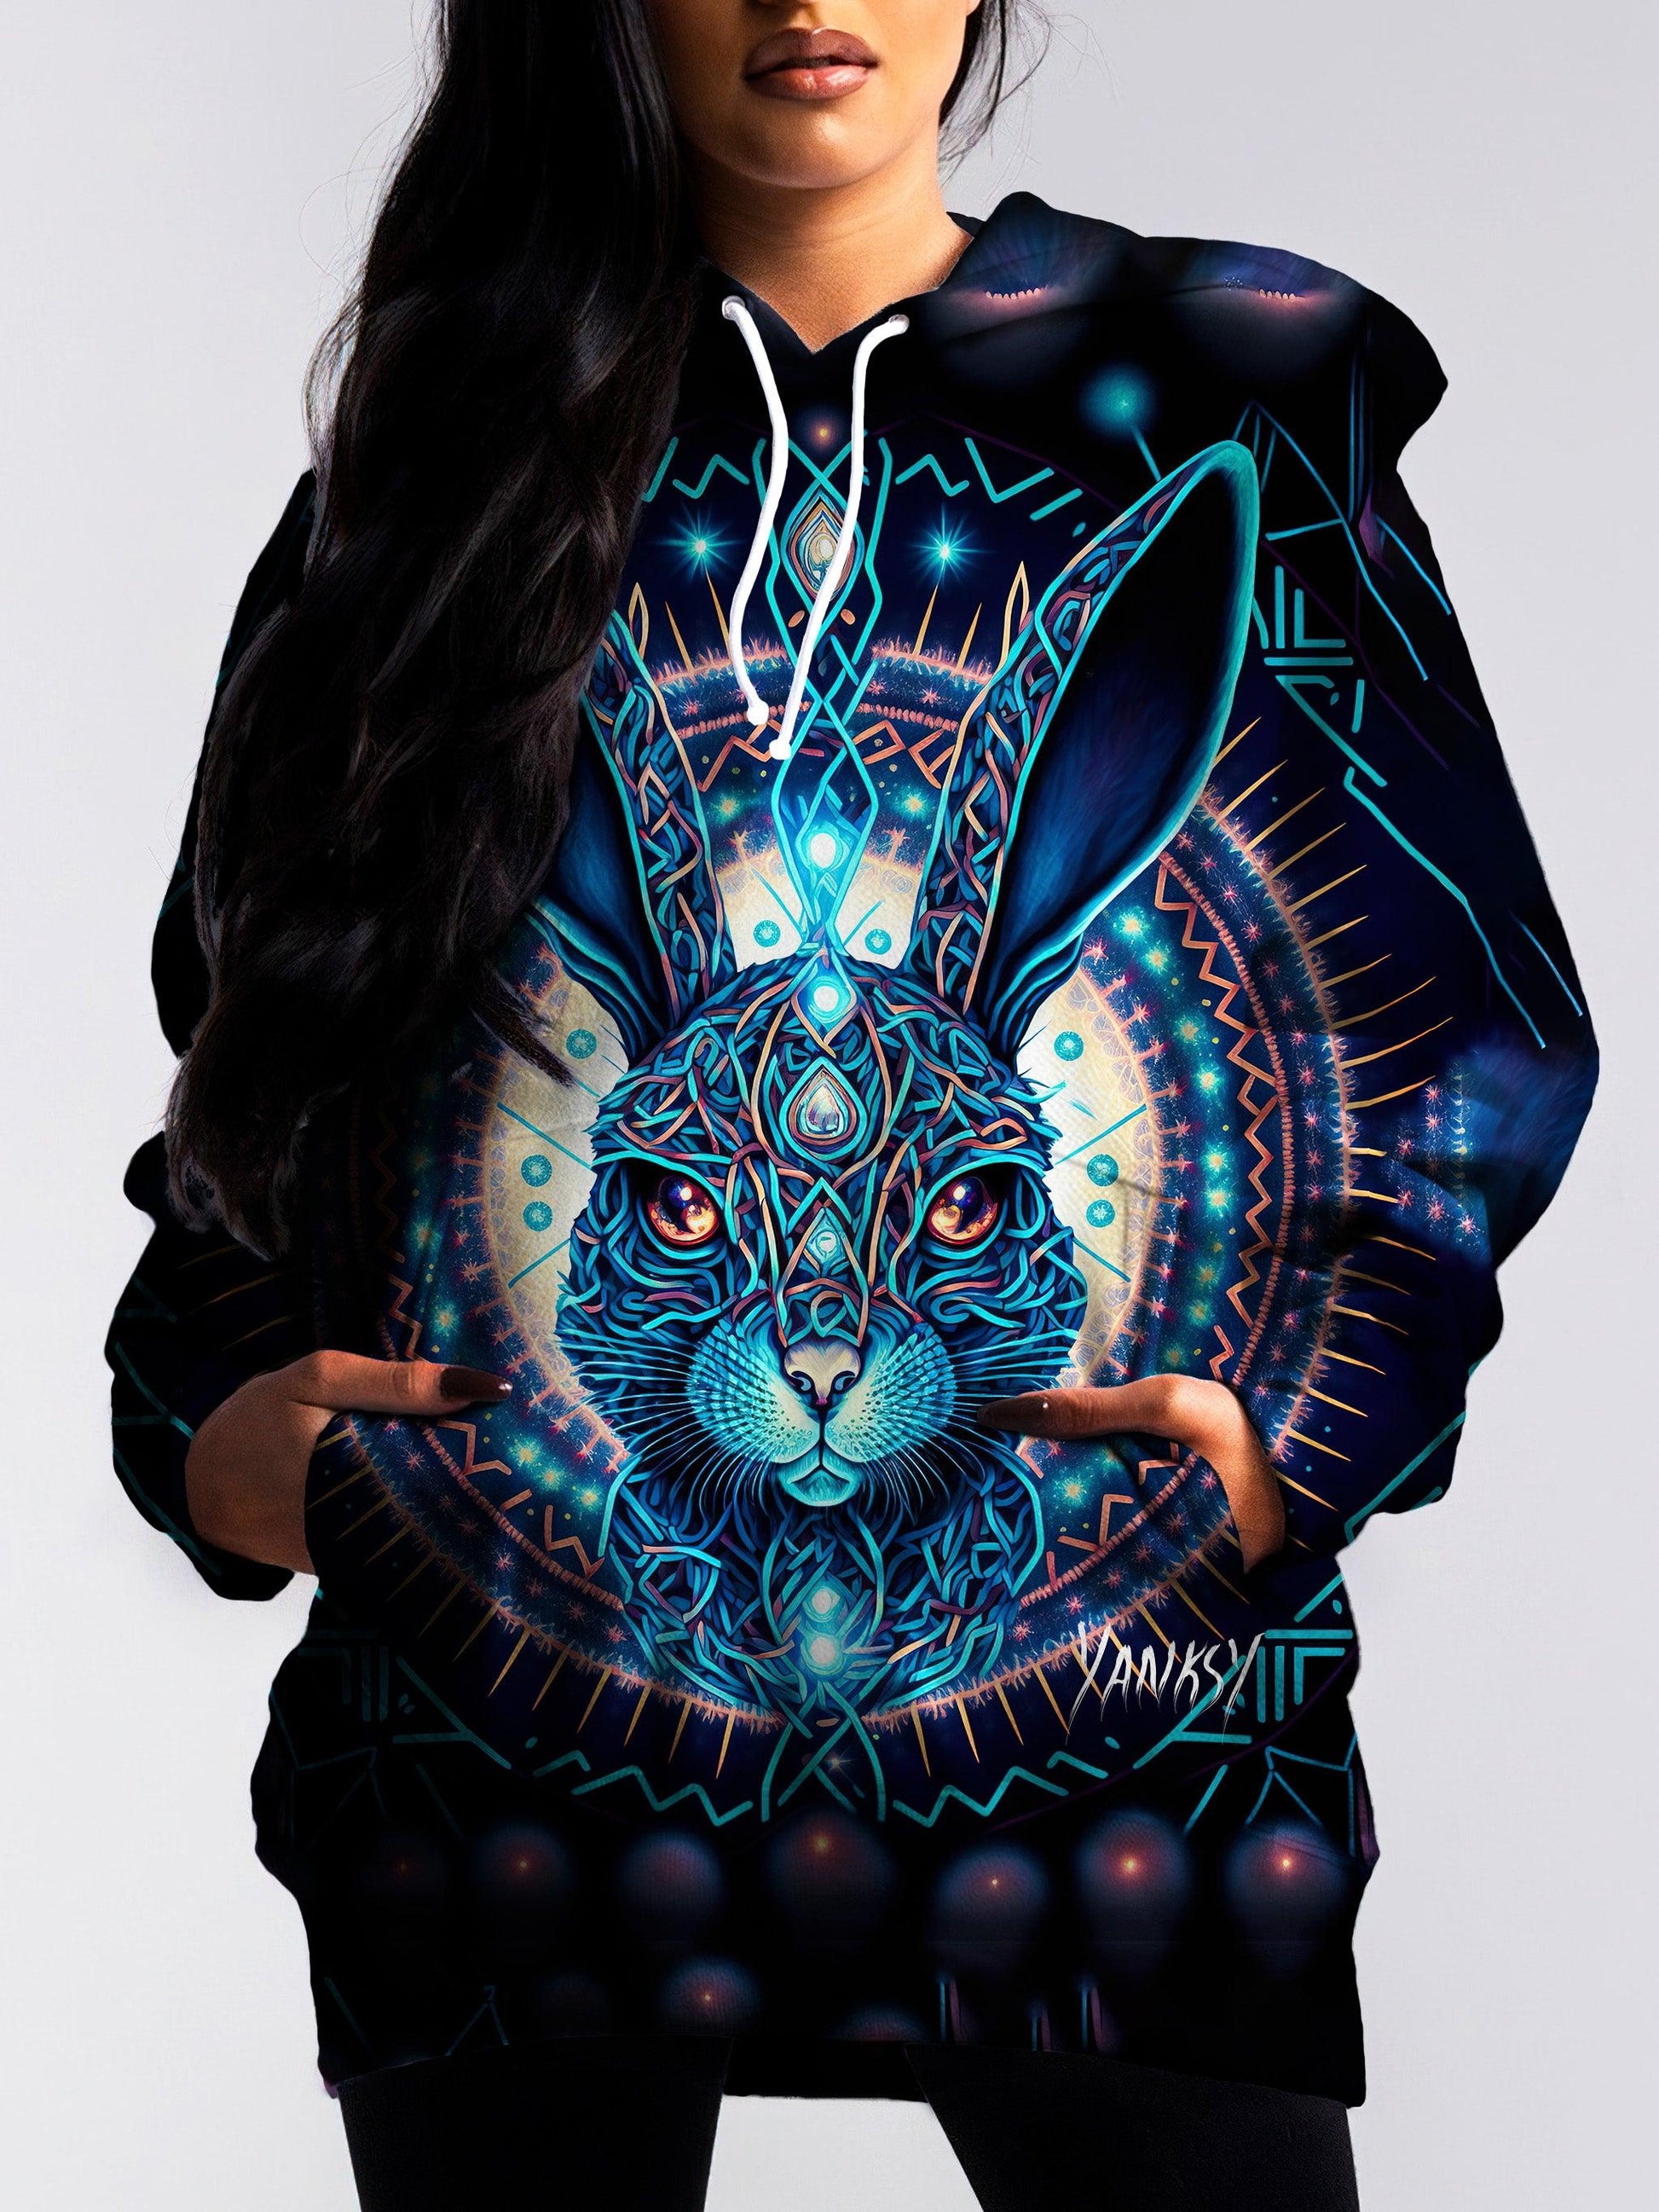 Perfect for raves and festivals, this comfortable pullover hoodie will keep you feeling your best